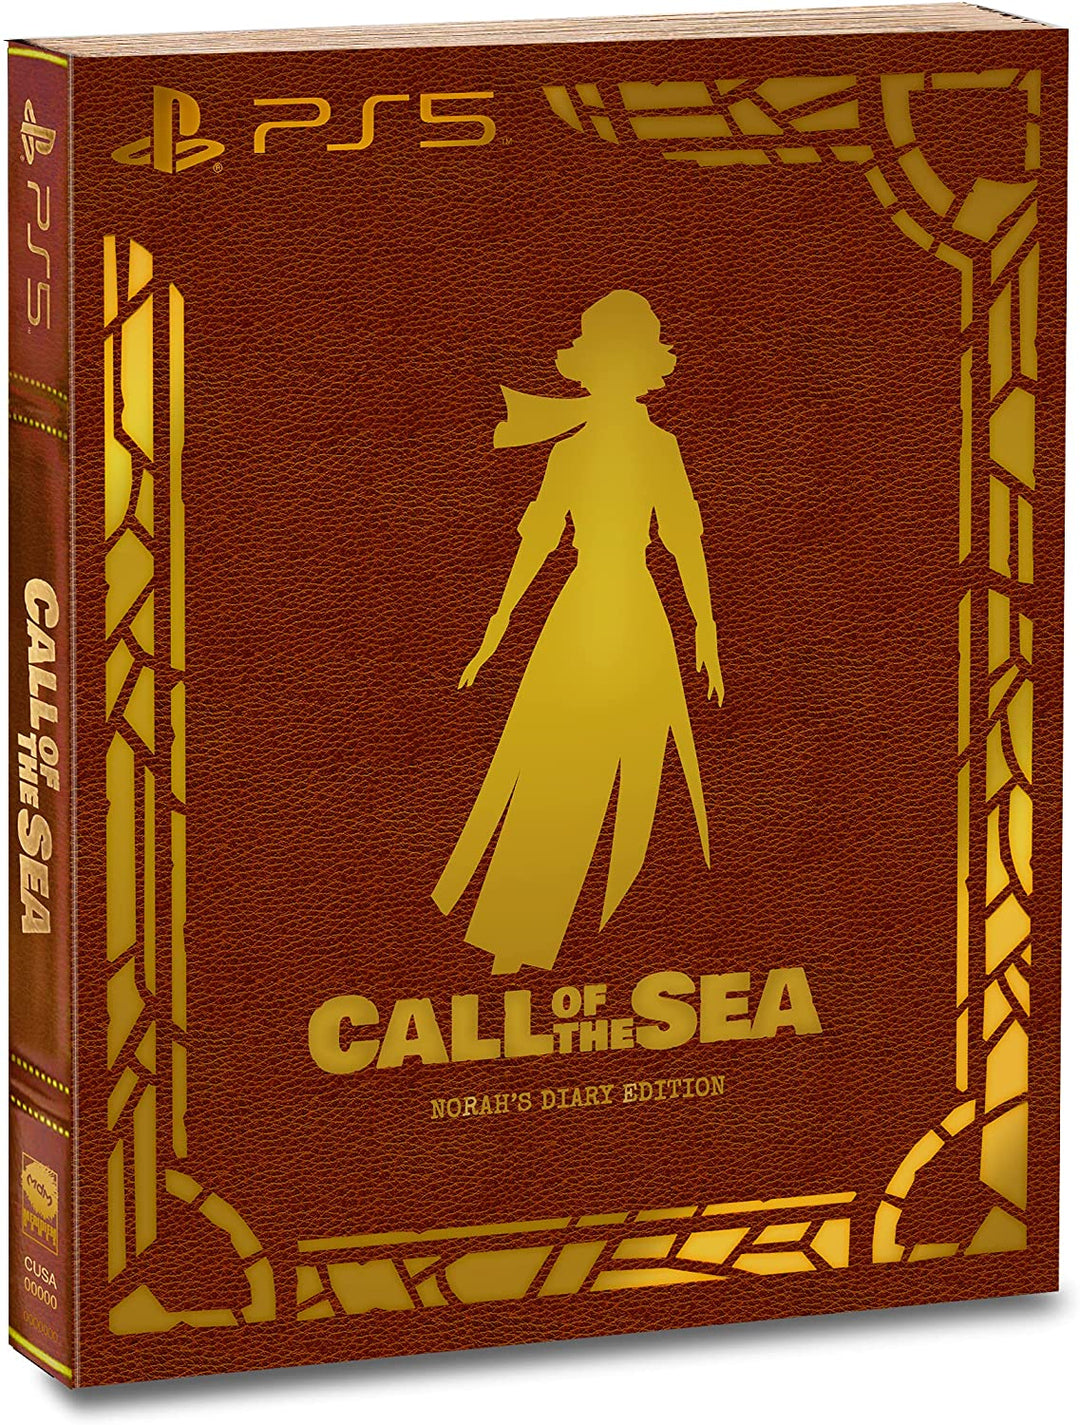 Call of the Sea – Norah's Diary Edition PS5 (PS5)